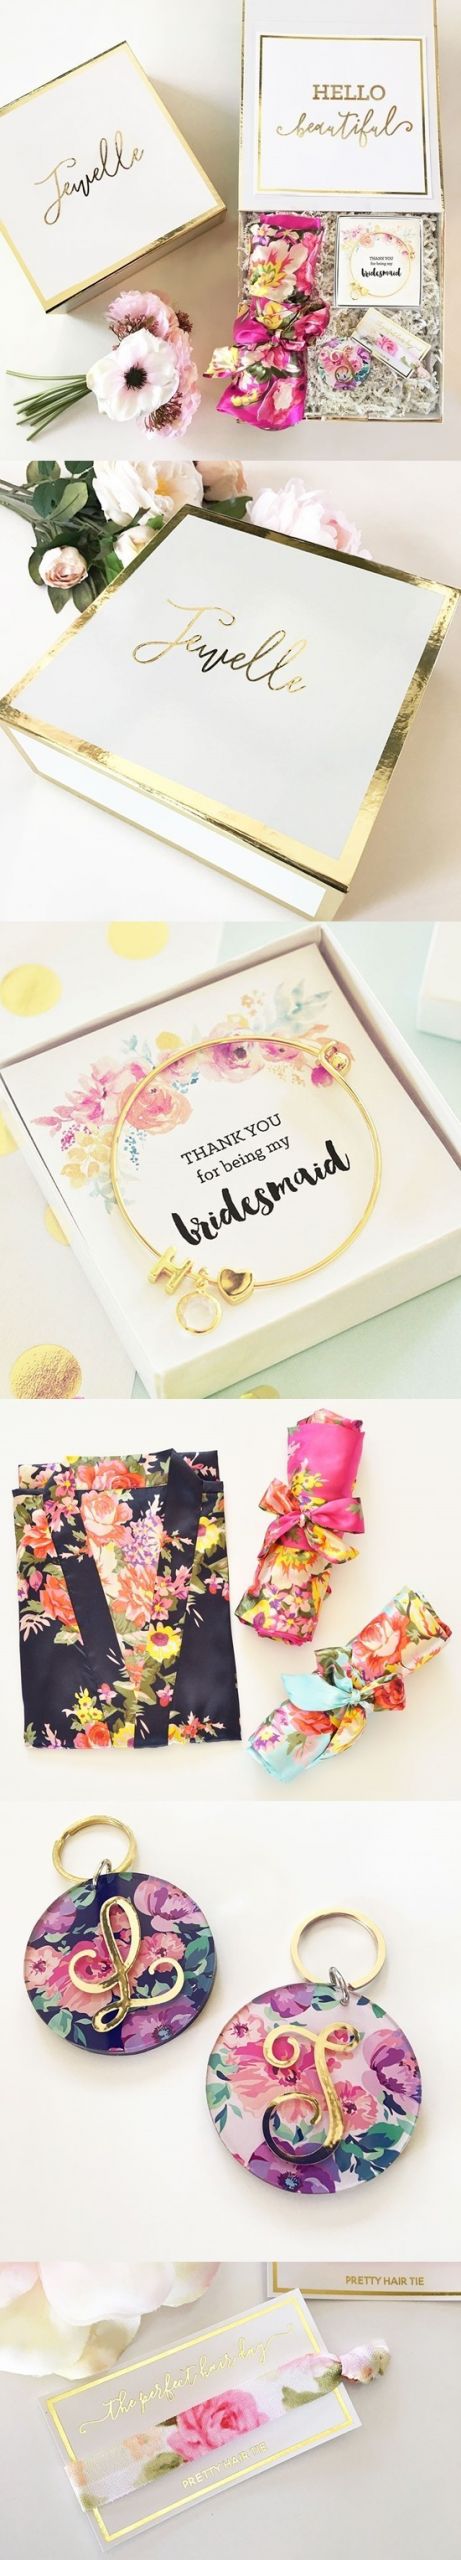 Bridesmaid Thank You Gift Box Ideas
 Thank You for Being My Bridesmaid Gift Set in Personalized